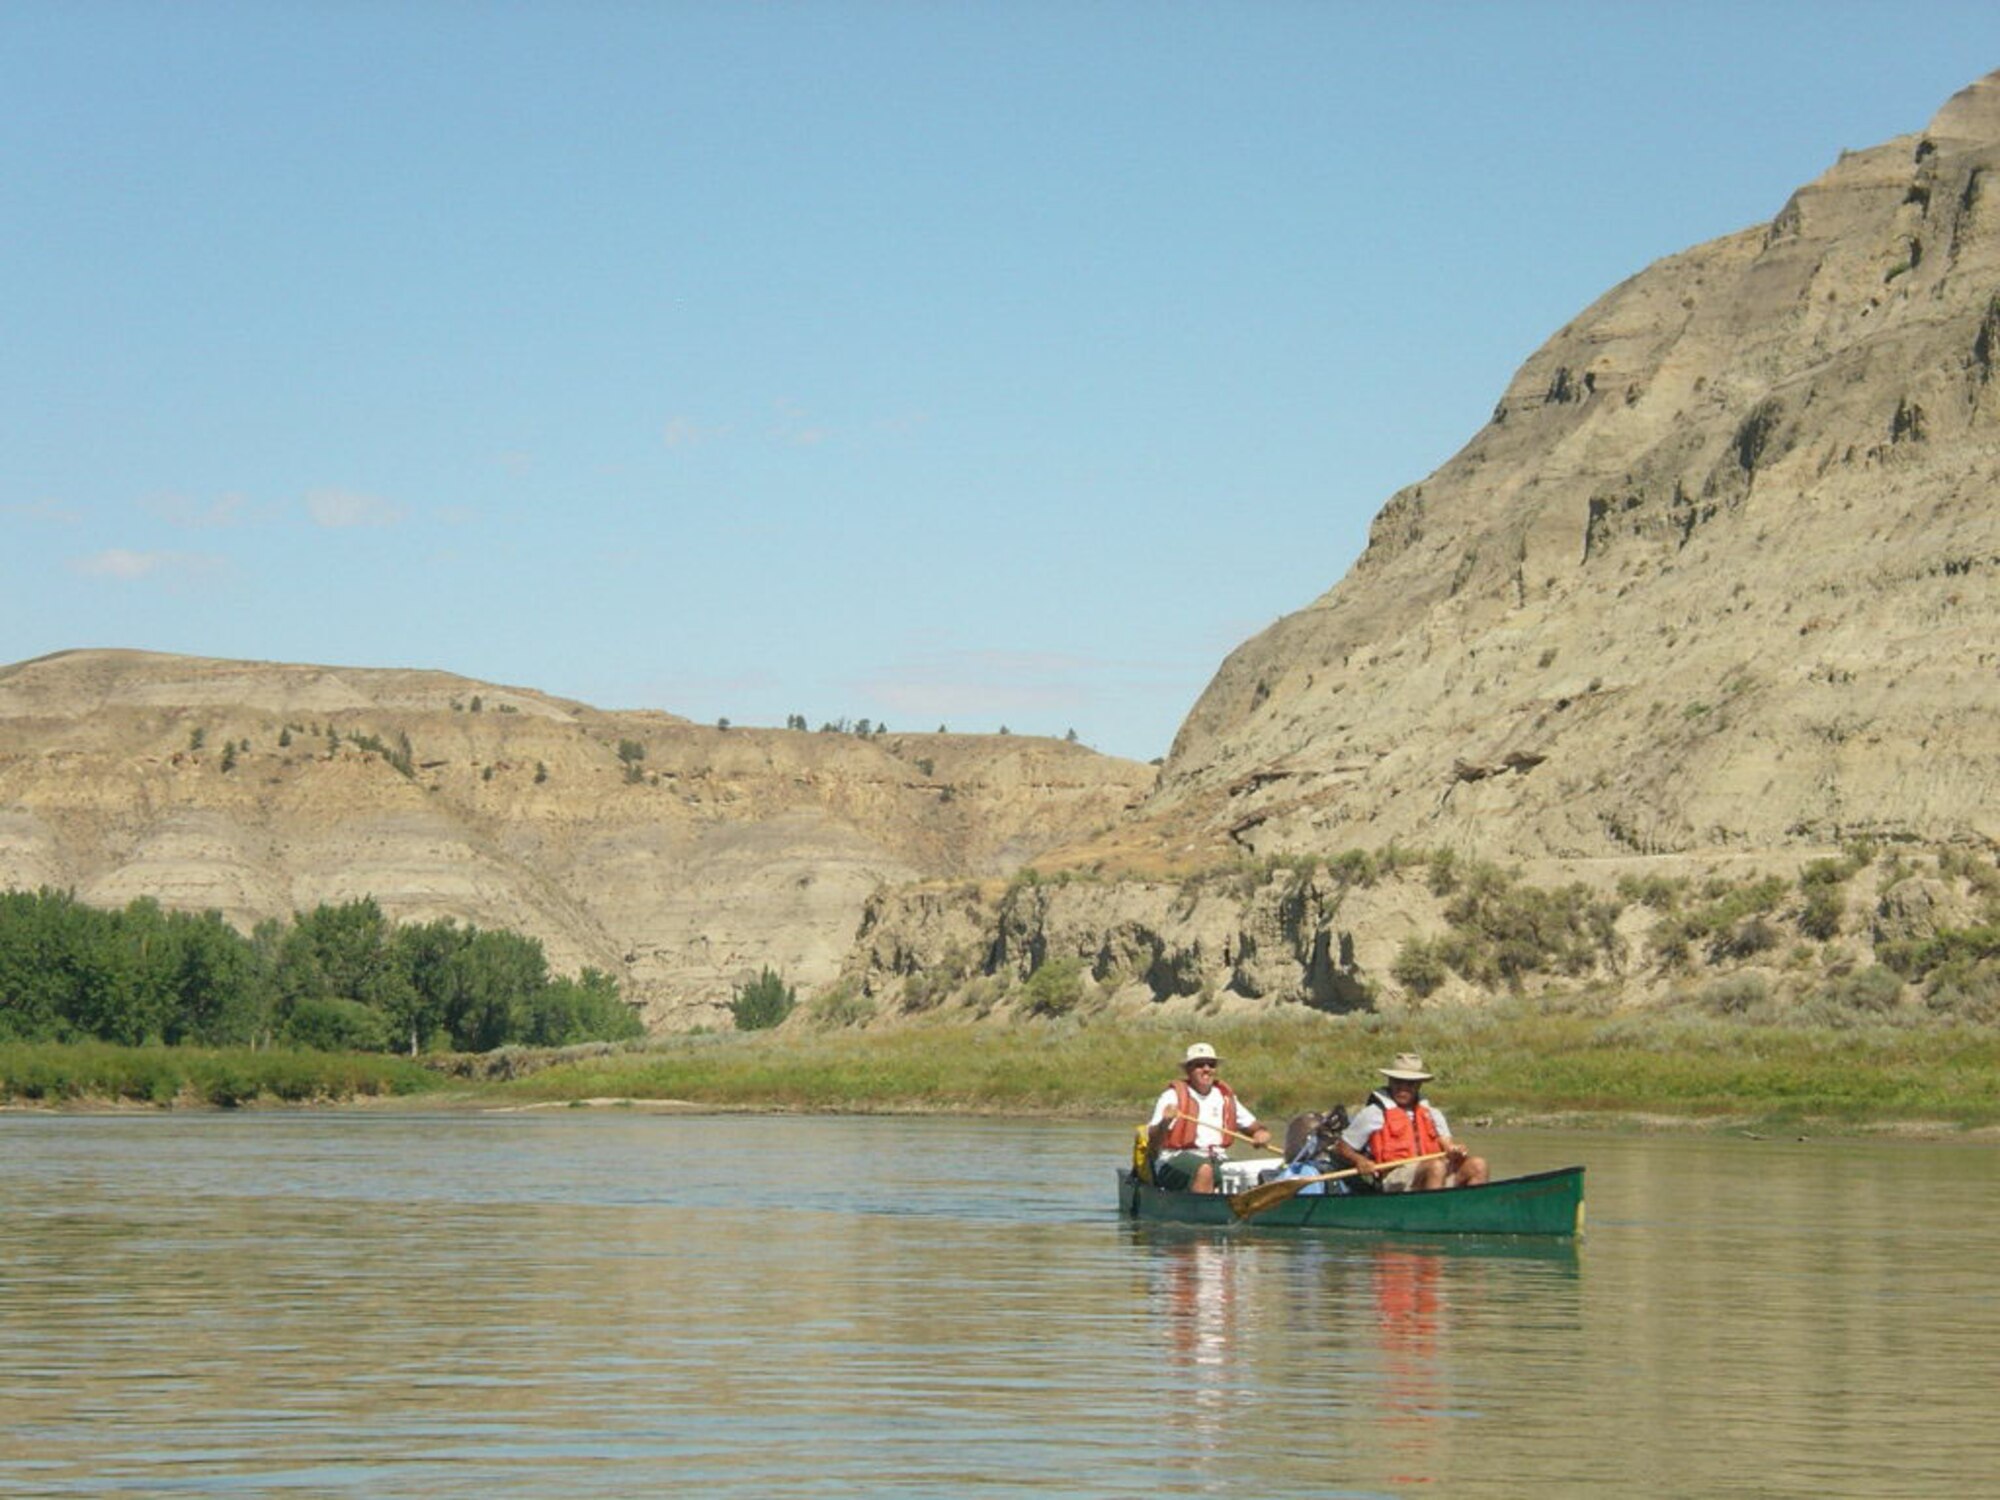 Chief Master Sgt. Larry Wilson (back) and Col. Steve Asher (front) paddle down the Missouri River near Fort Benton, Mont., while performing river patrol duties as volunteers for the Bureau of Land Management. (Courtesy photo)